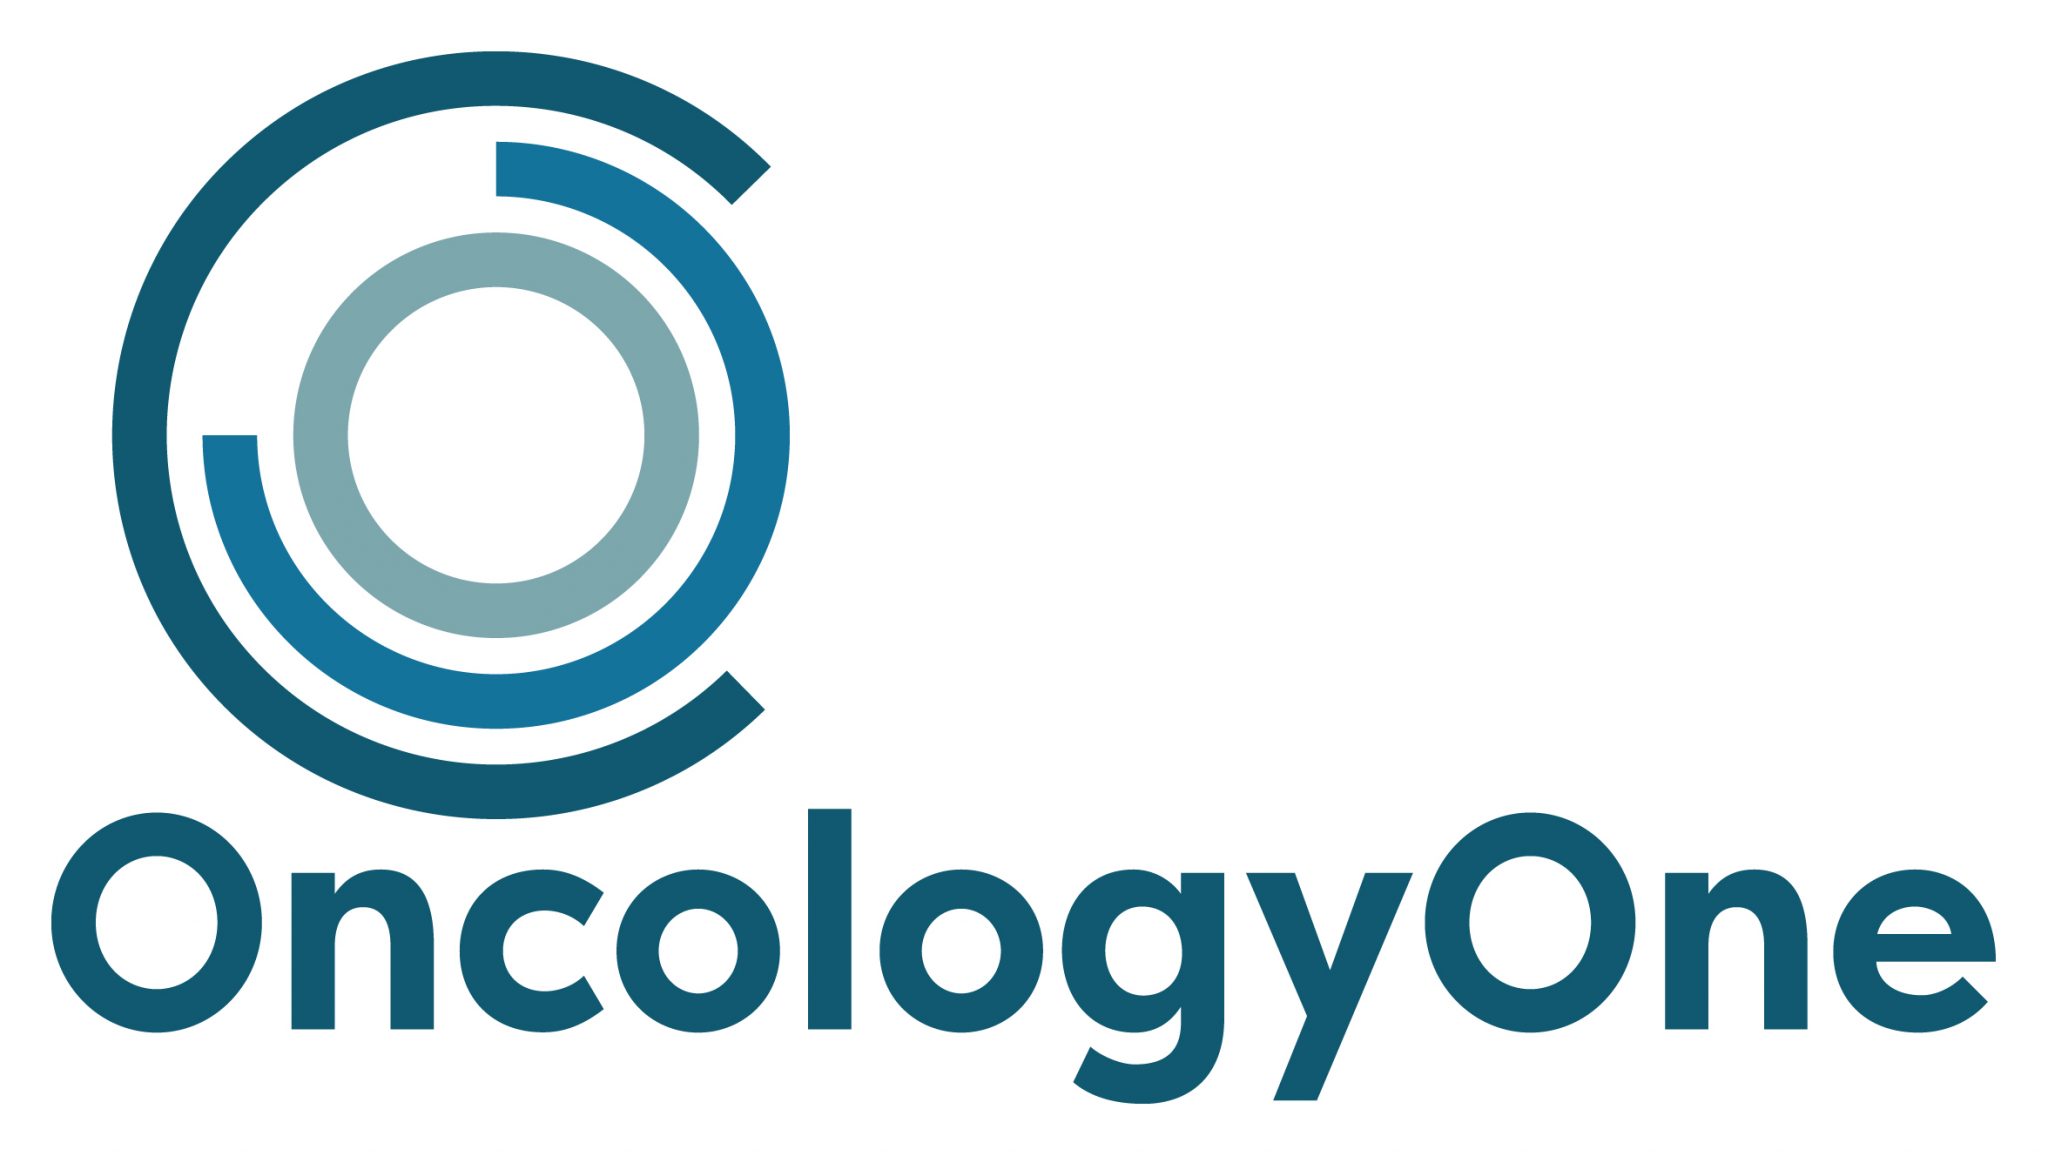 CTxONE Launches New Name, New Brand > Oncology One BioMelbourne Network